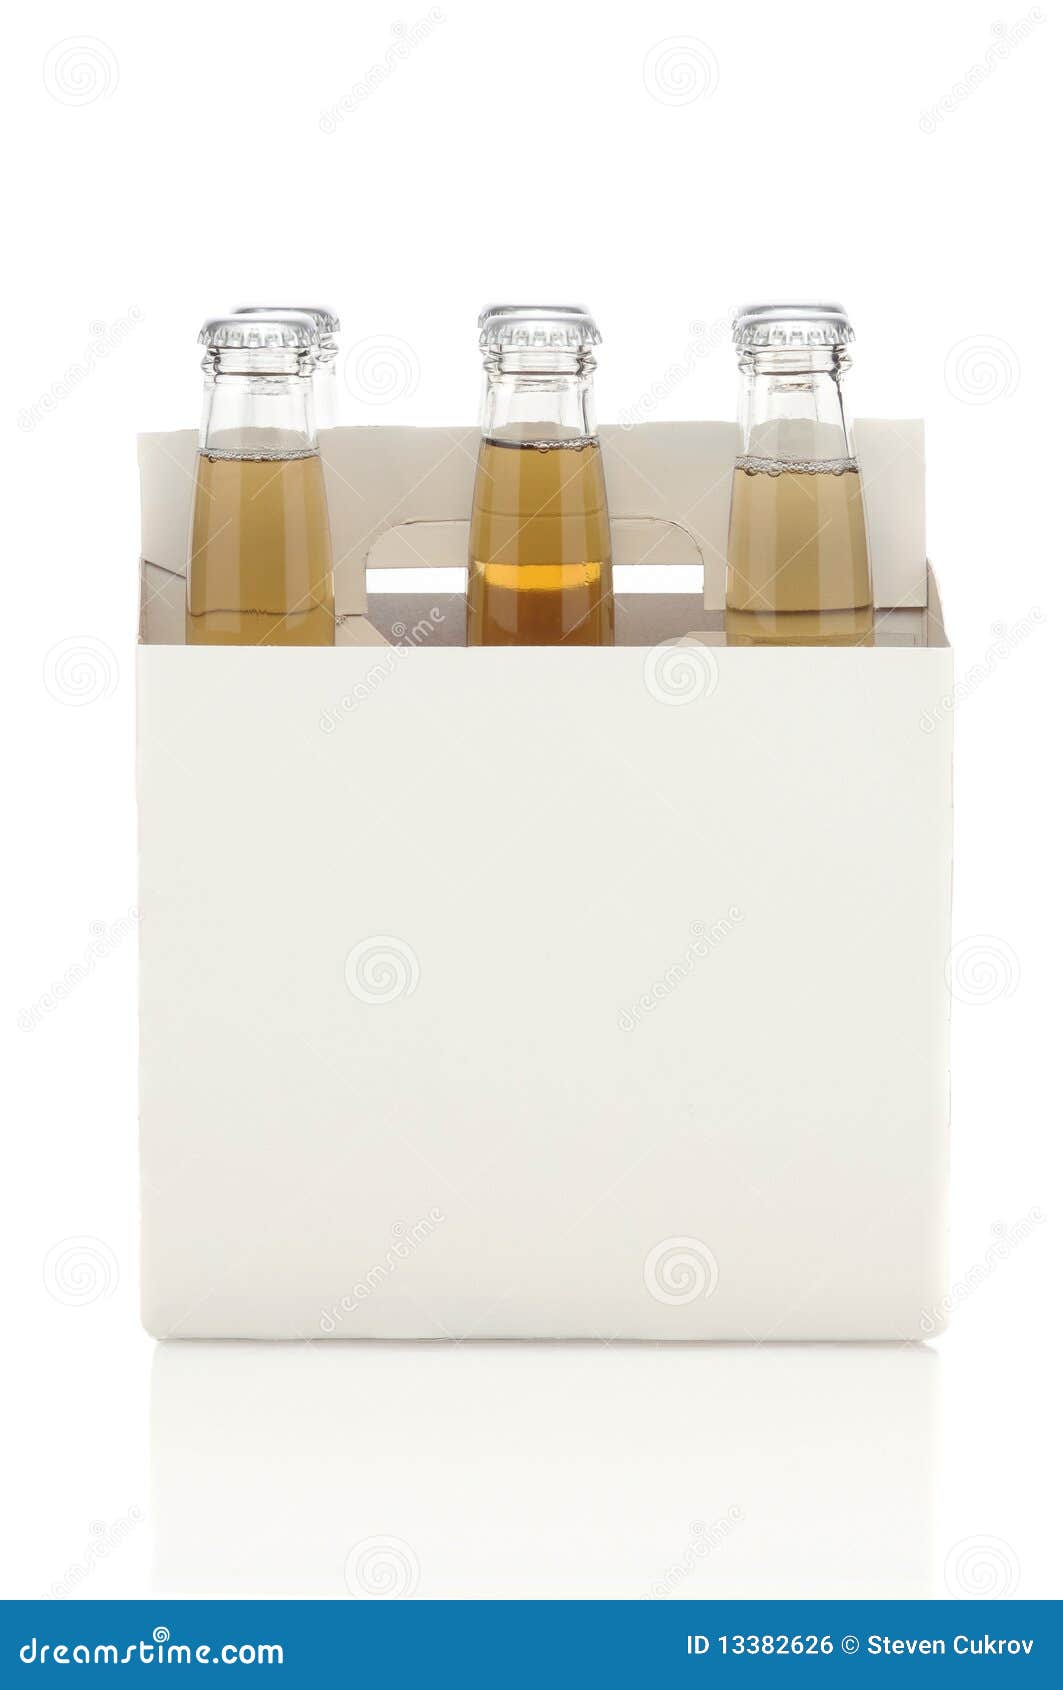 Download 343 Six Pack Beer Photos Free Royalty Free Stock Photos From Dreamstime Yellowimages Mockups